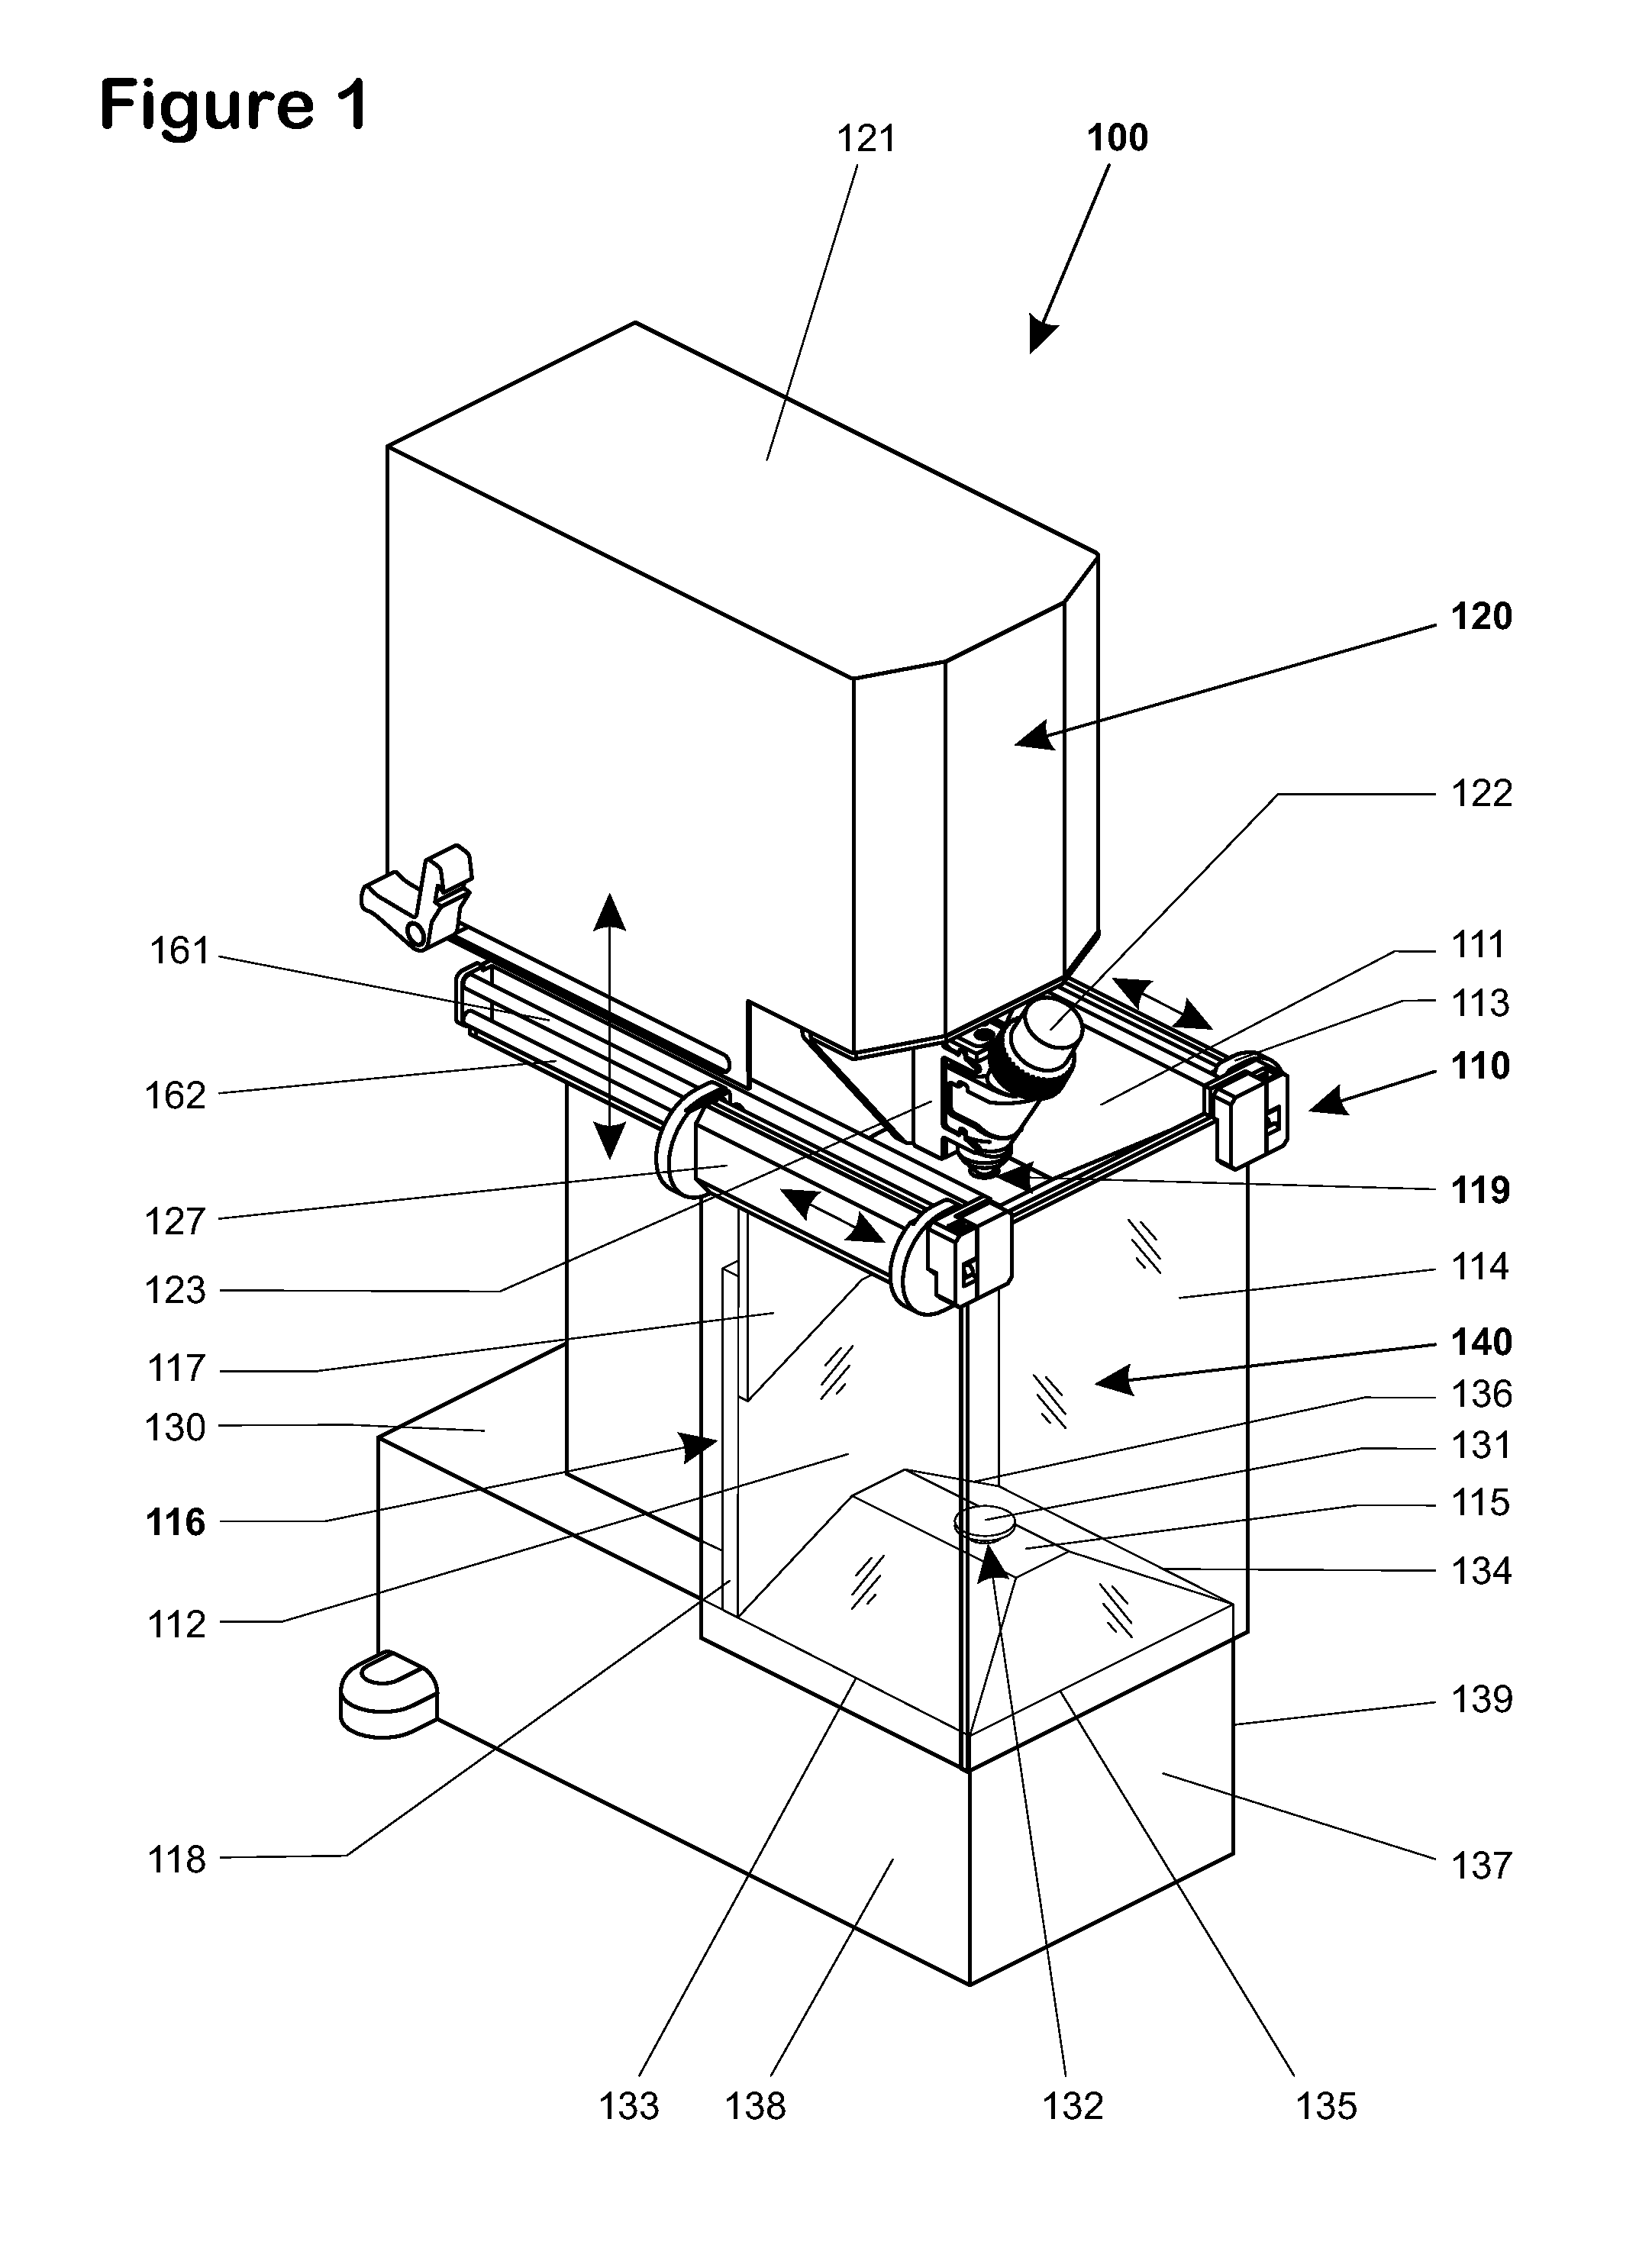 Enclosure for a laboratory balance with a sliding side wall mounted such that the top guide sliding mechanism imparts a turning moment on the lower edge of the wall to press it against an abutment of the weighing compartment to form a seal